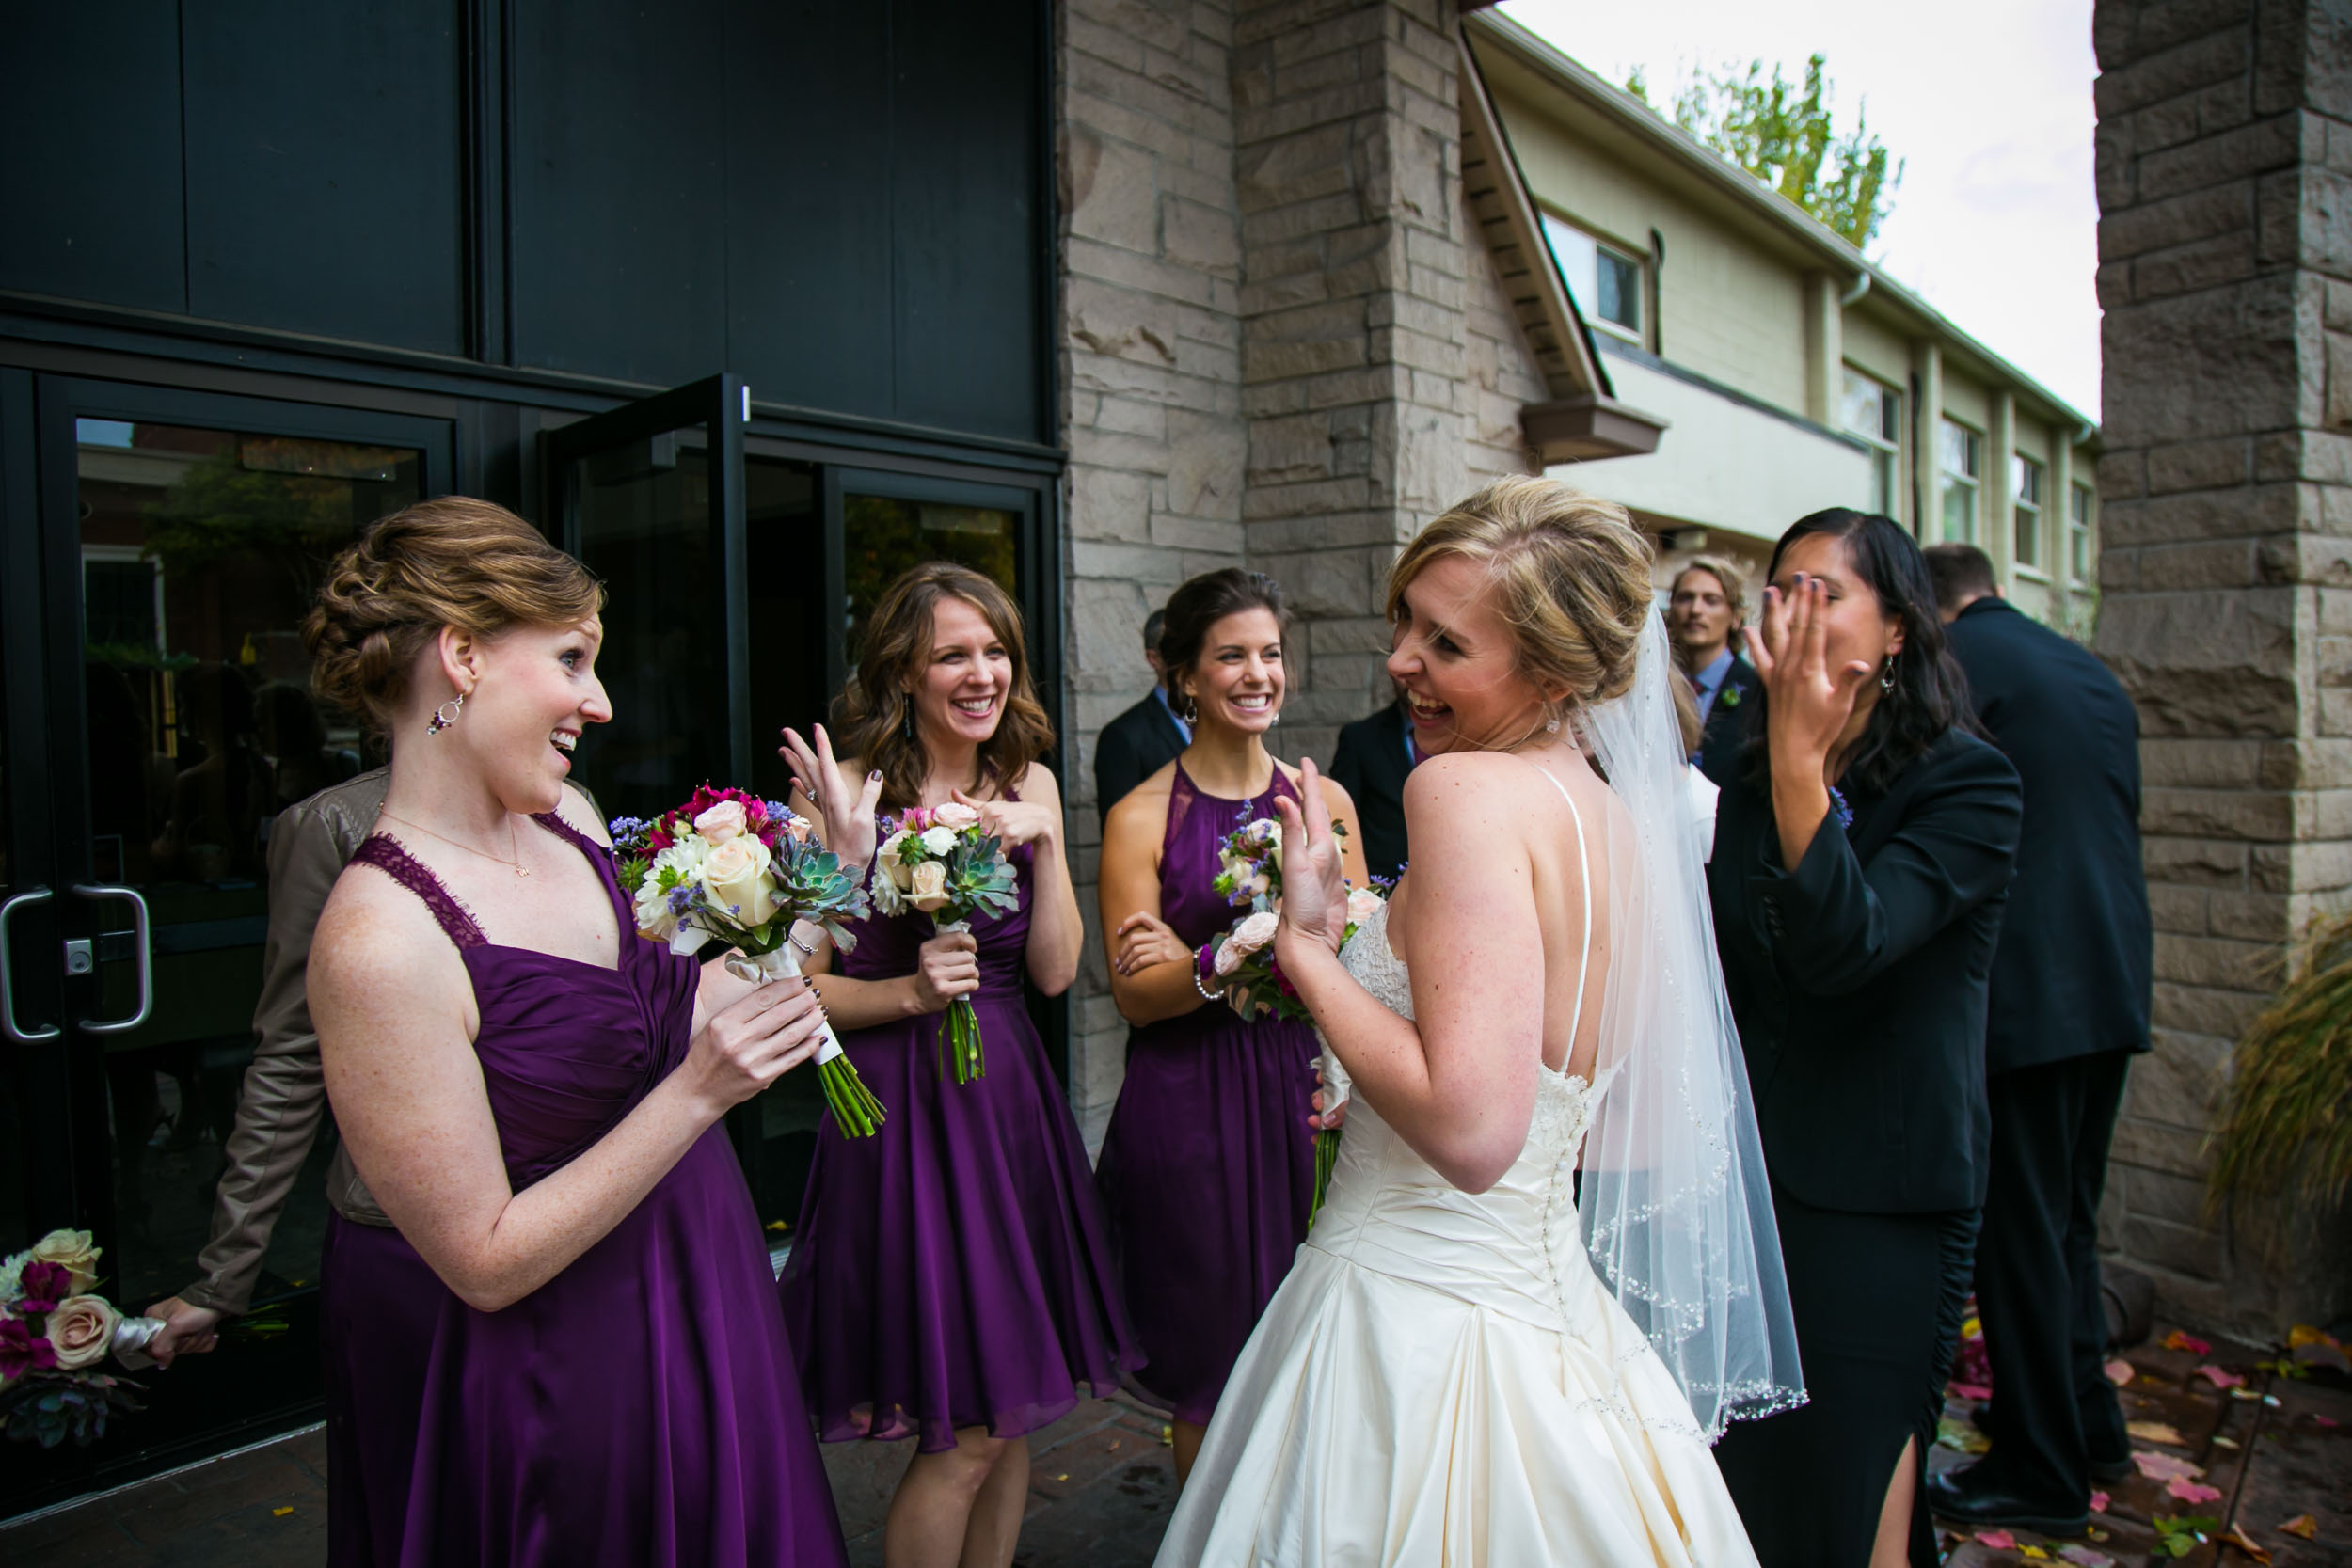 Seattle Community Church Wedding Photography | By G. Lin Photography | Bride happy with bridesmaids